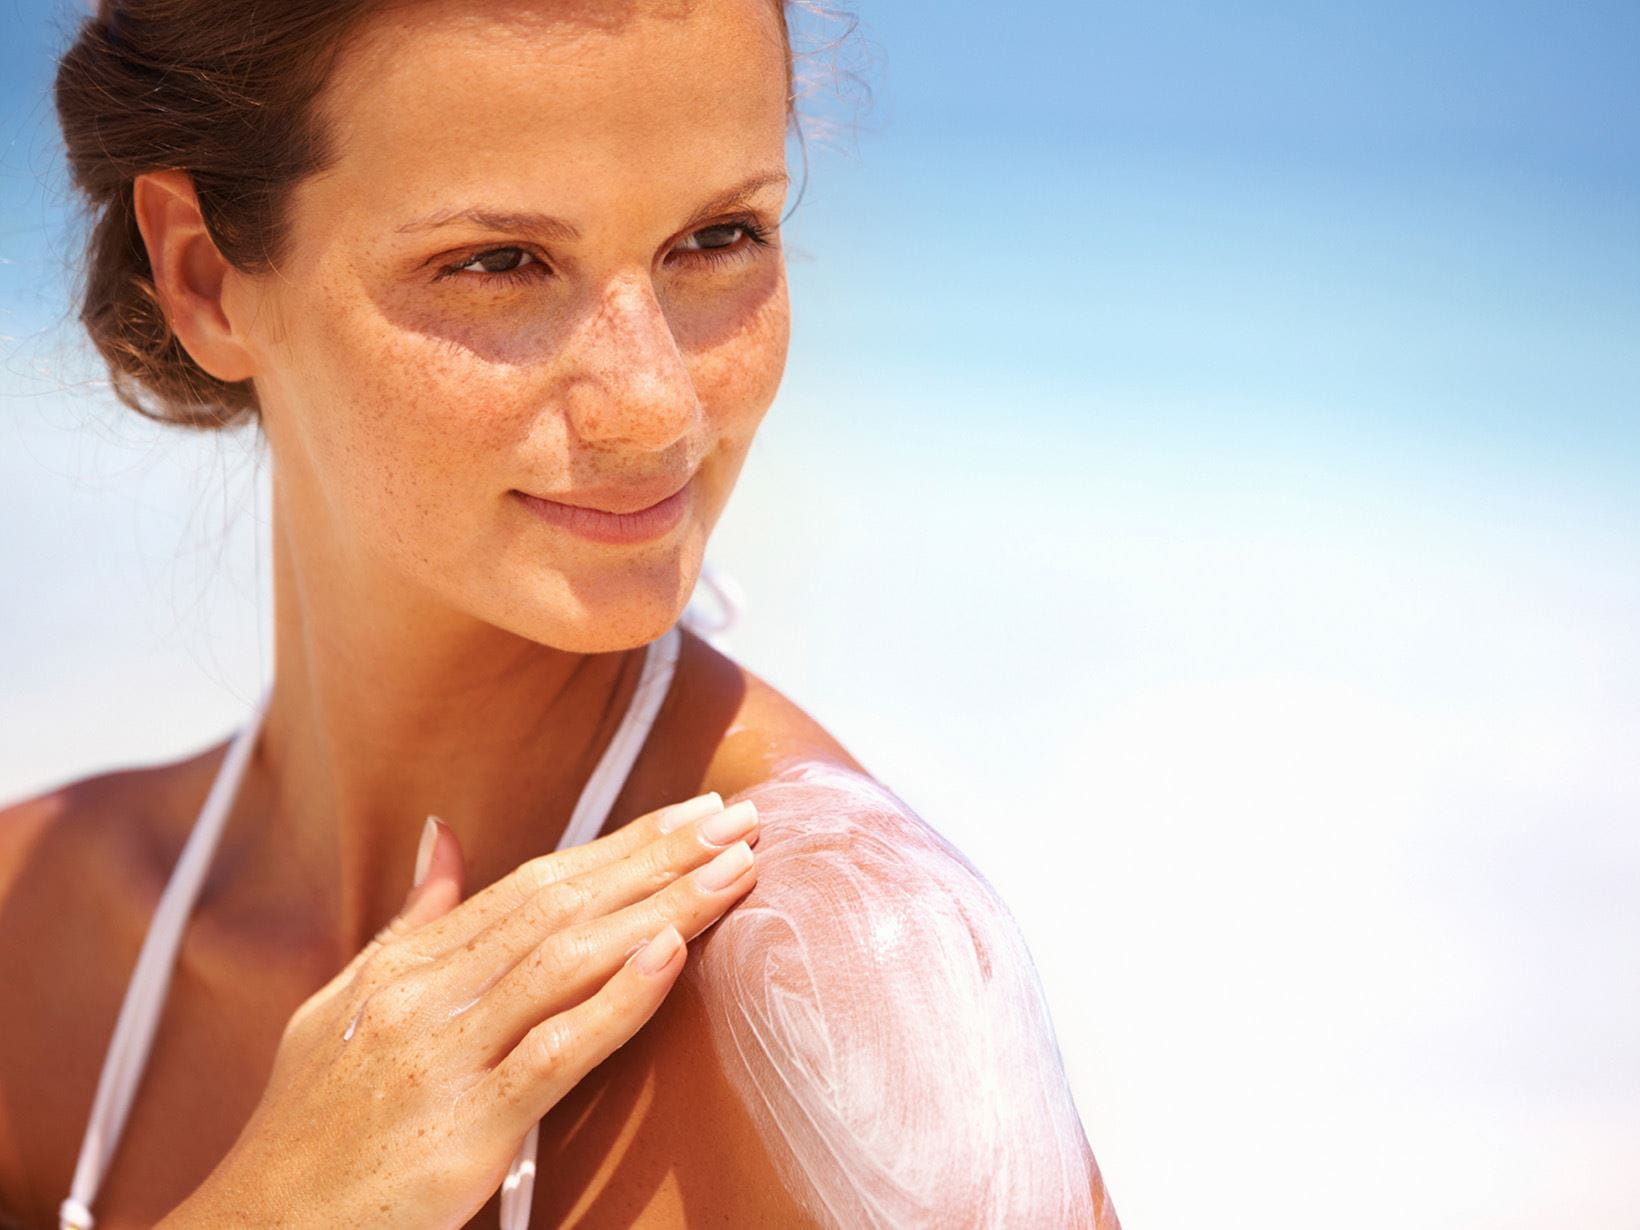 woman applying sunscreen to her shoulder